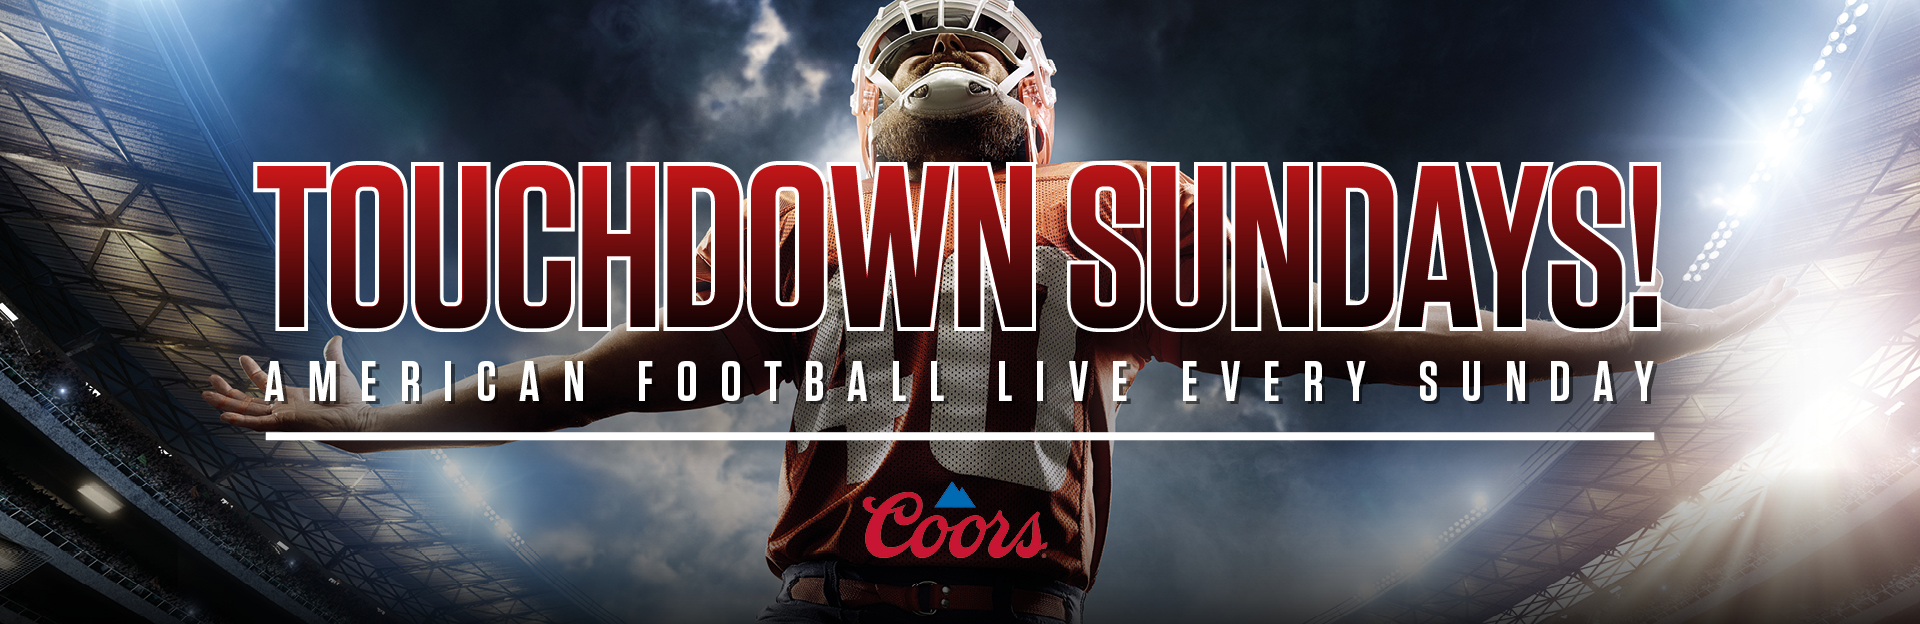 Watch NFL at The Earl Derby